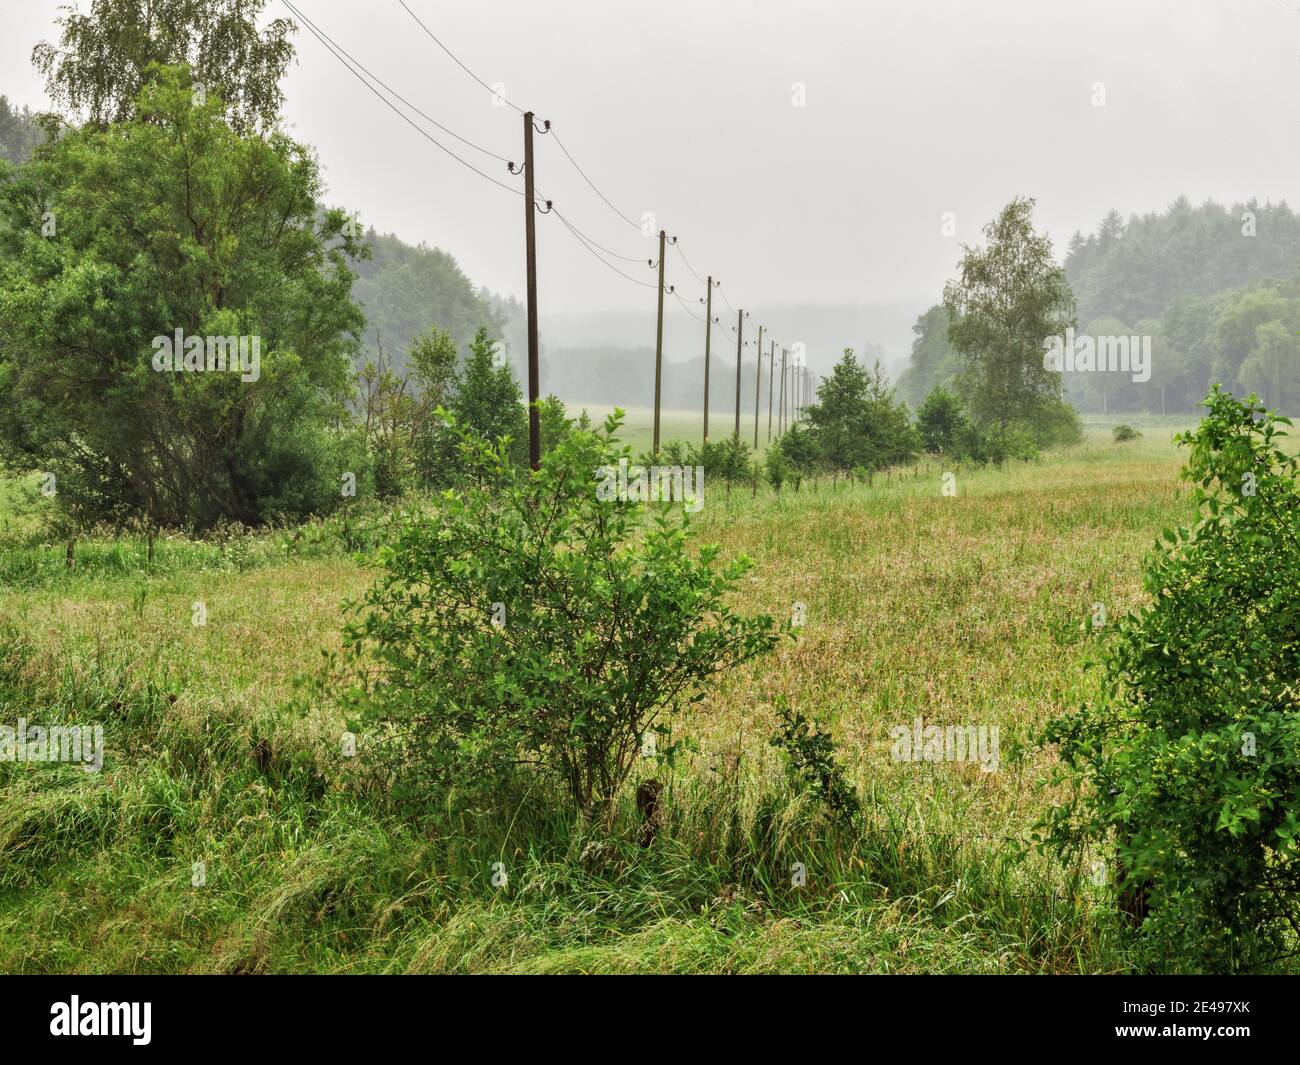 Meadows, trees, bushes, hedges, fences, streams, power lines Stock Photo